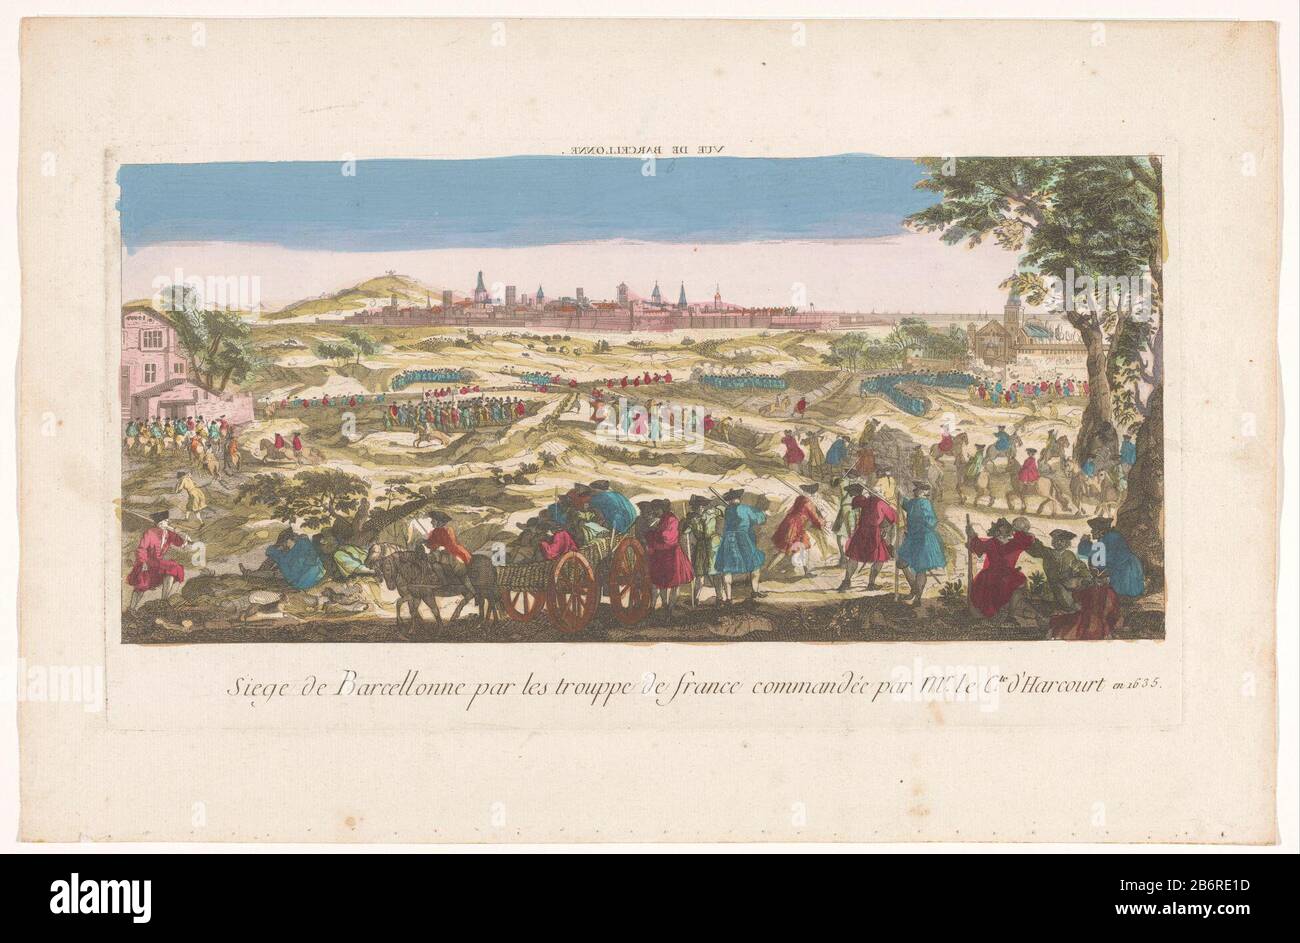 View of the siege of Barcelona by the French in the 1635Siege Barcellonne par les trouppe de France commandée par le Mr. Cte.. d'Harcourt and 1635 (title object) Property Type: print optics picture Item number: RP-P-1925-1171 Inscriptions / Brands: collector's mark, verso lower right, stamped: Lugt 2166watermerk Manufacturer : Publisher: anonymous printmaker: anonymous Date: 1700 - 1799 Physical features: colored etching material: watercolor paper Technique: etching / brush dimensions: plate edge: h 232 mm × W 427 mm Subject: attack  siege French-Spanish war where: 1635 - 1635 Stock Photo